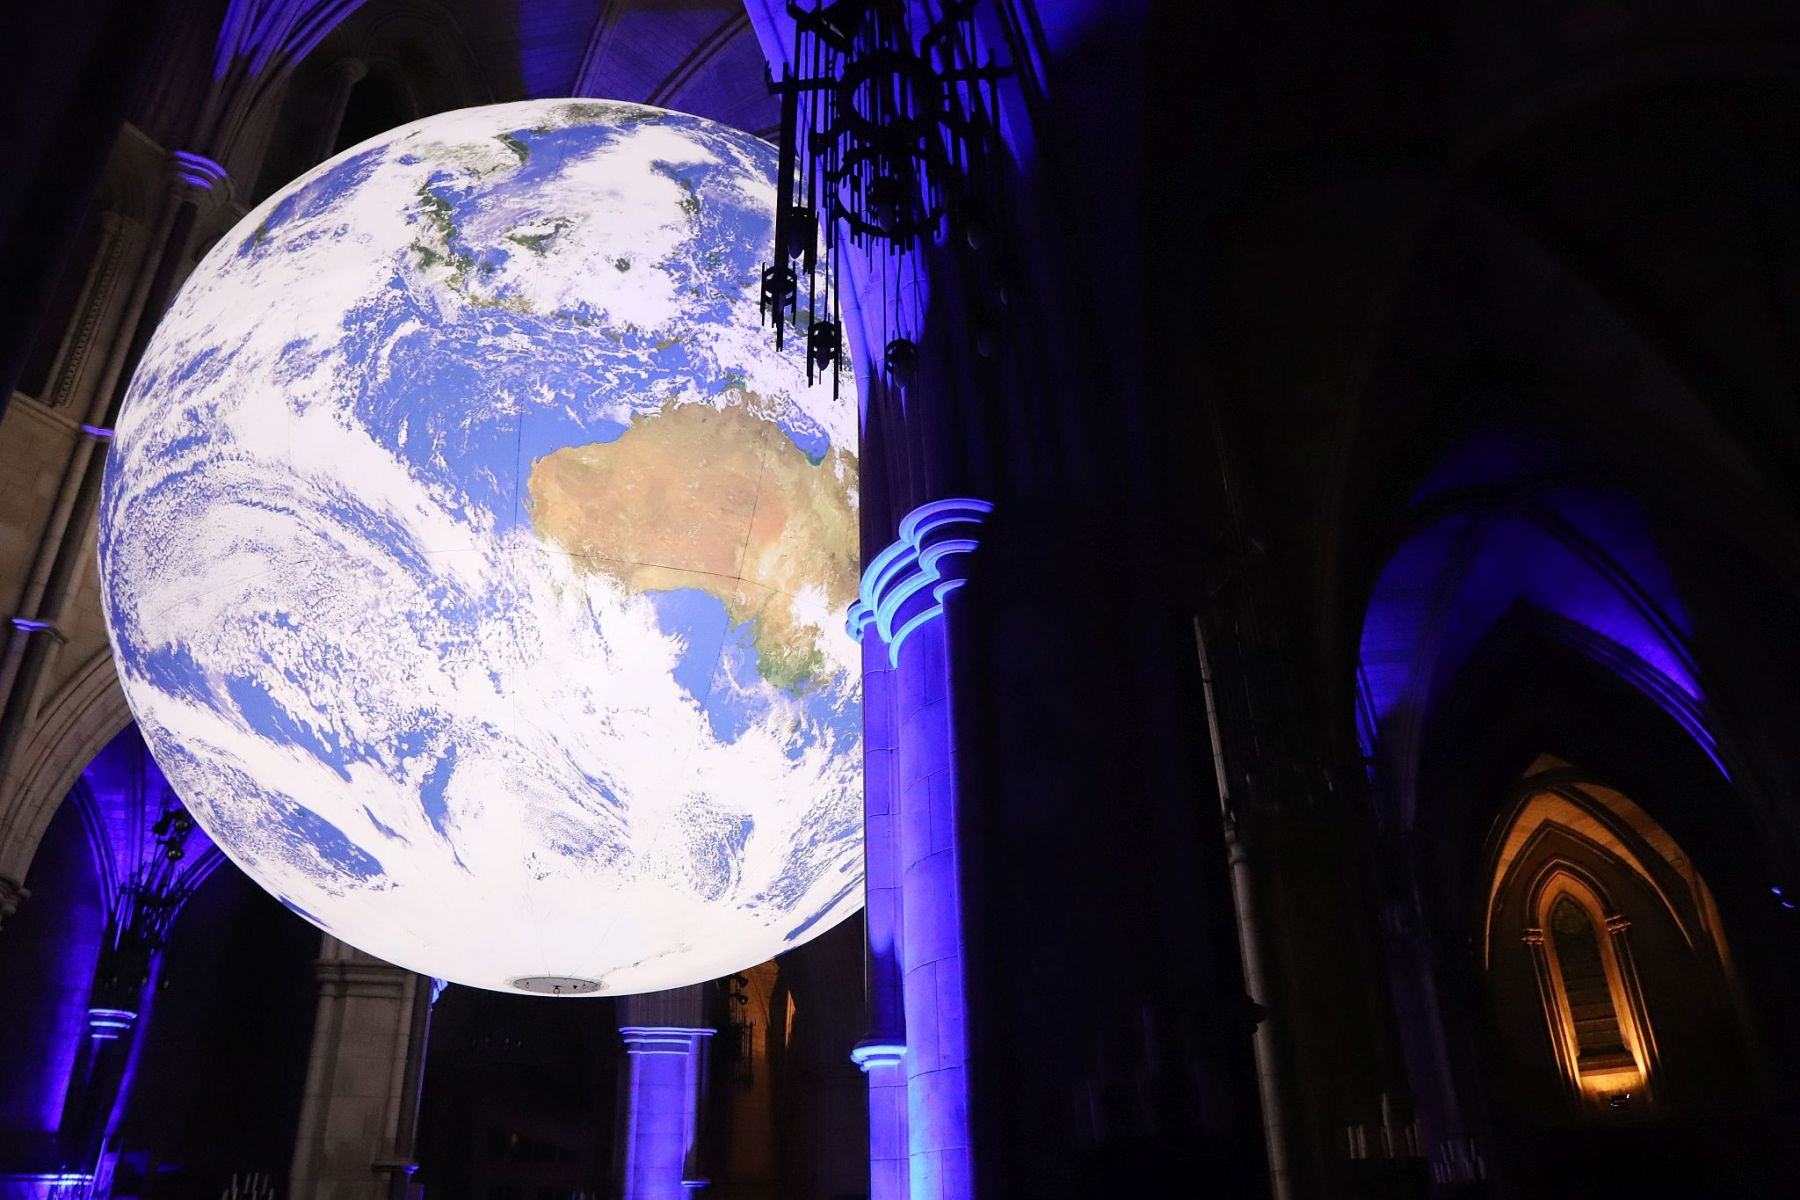 Gaia Earth by Luke Jerram at Southwark Cathedral in October 2022, seen at night